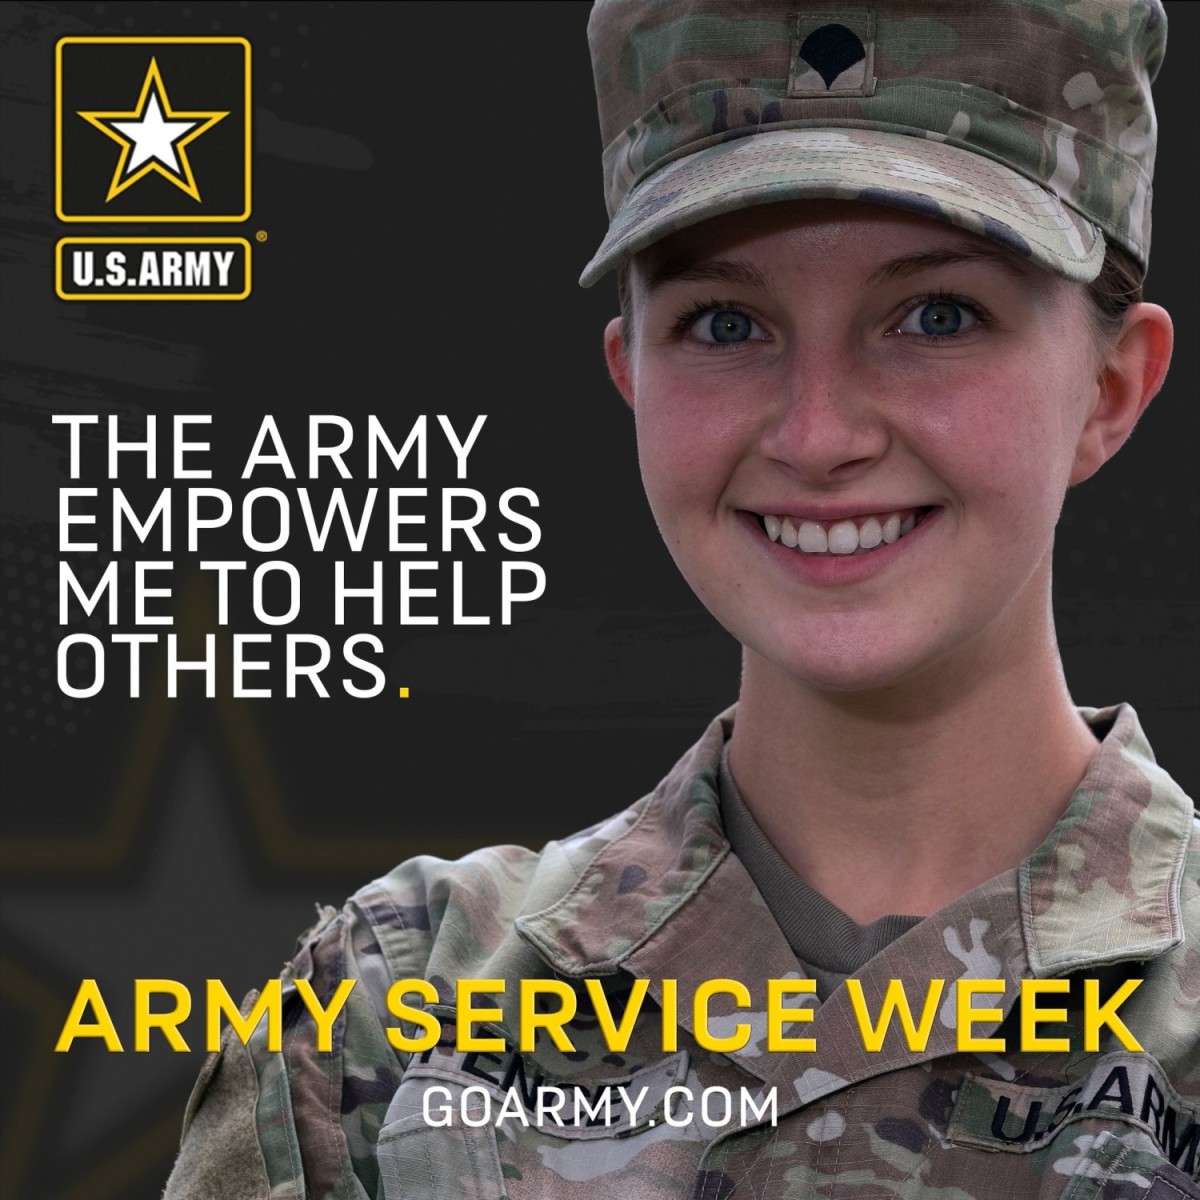 US Army marches forward with Army Service Week Article The United